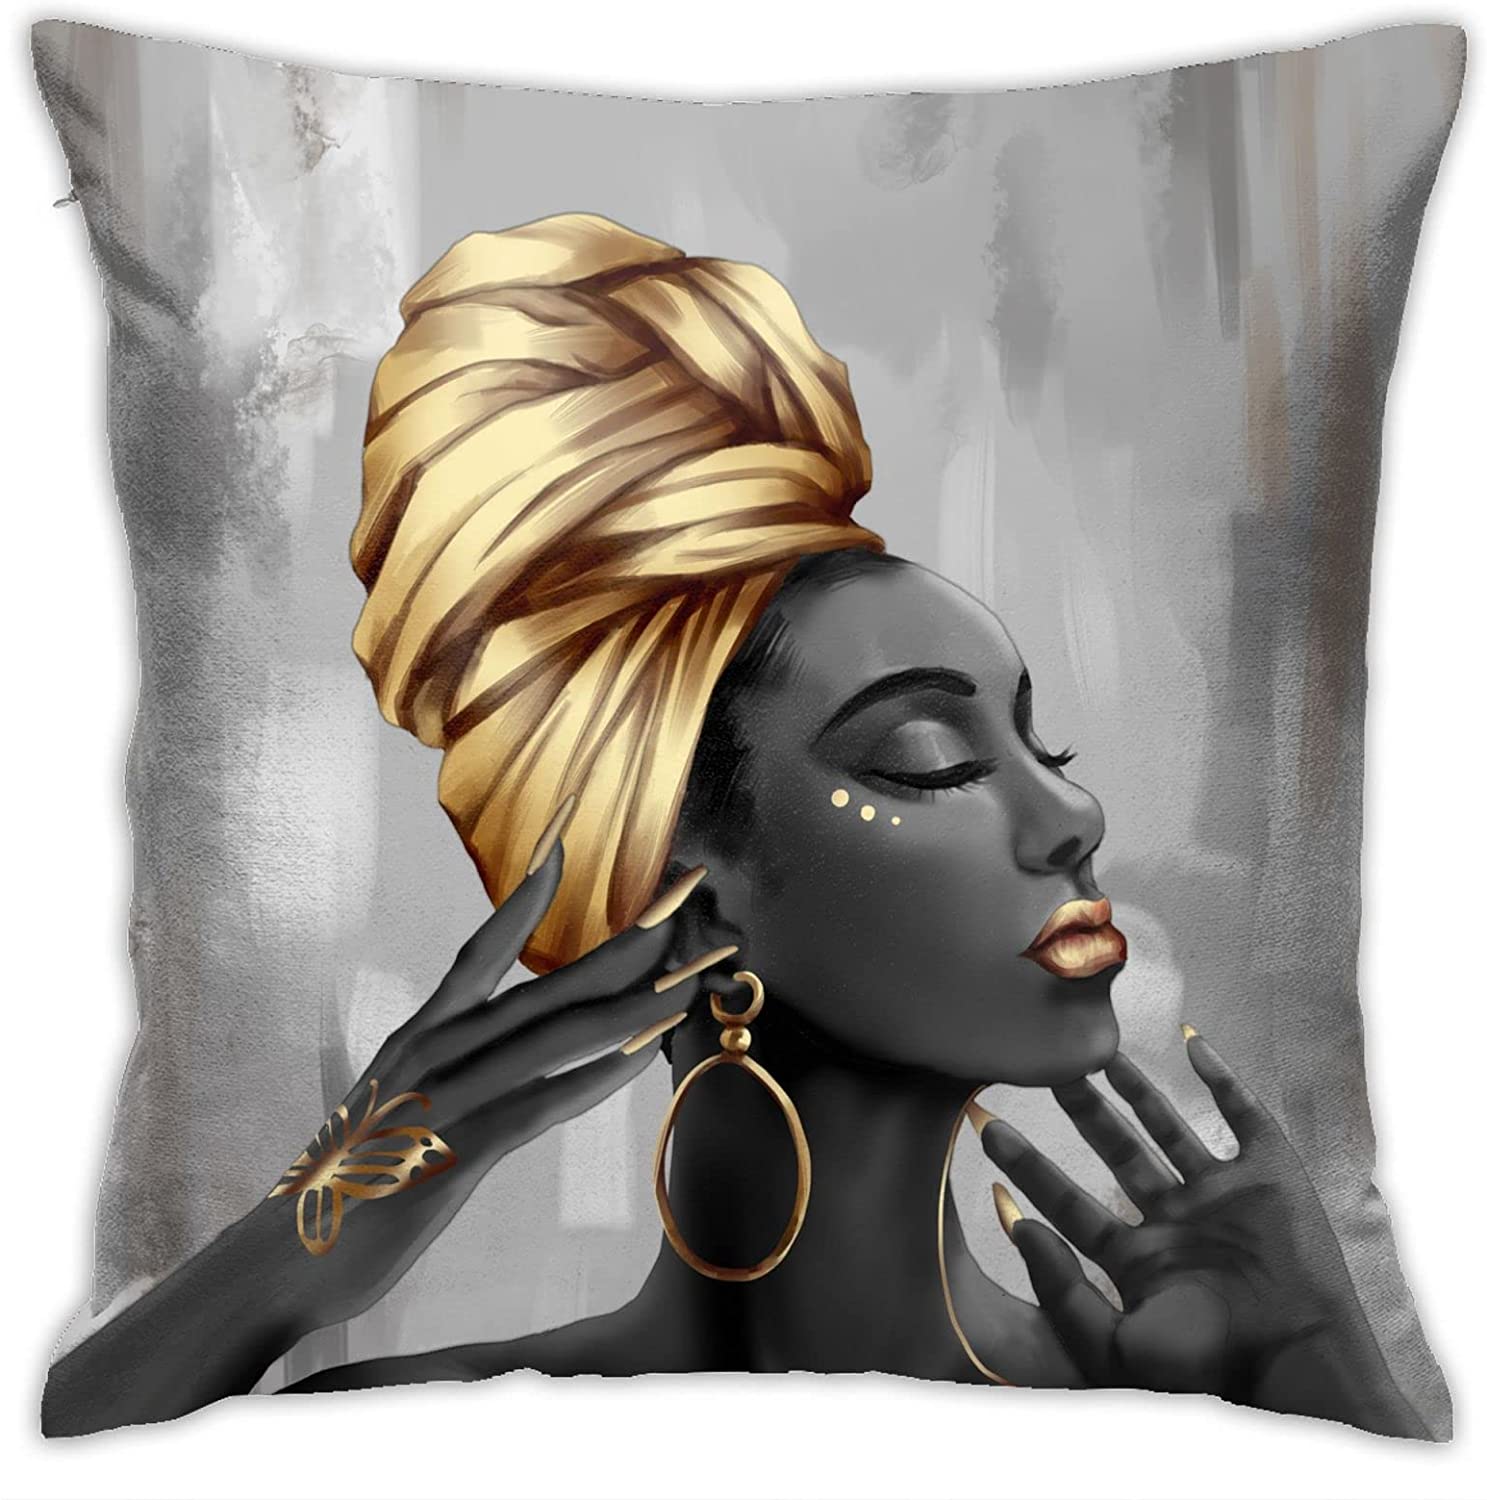 Afro Black Girl With Gold Hood African American Pillow